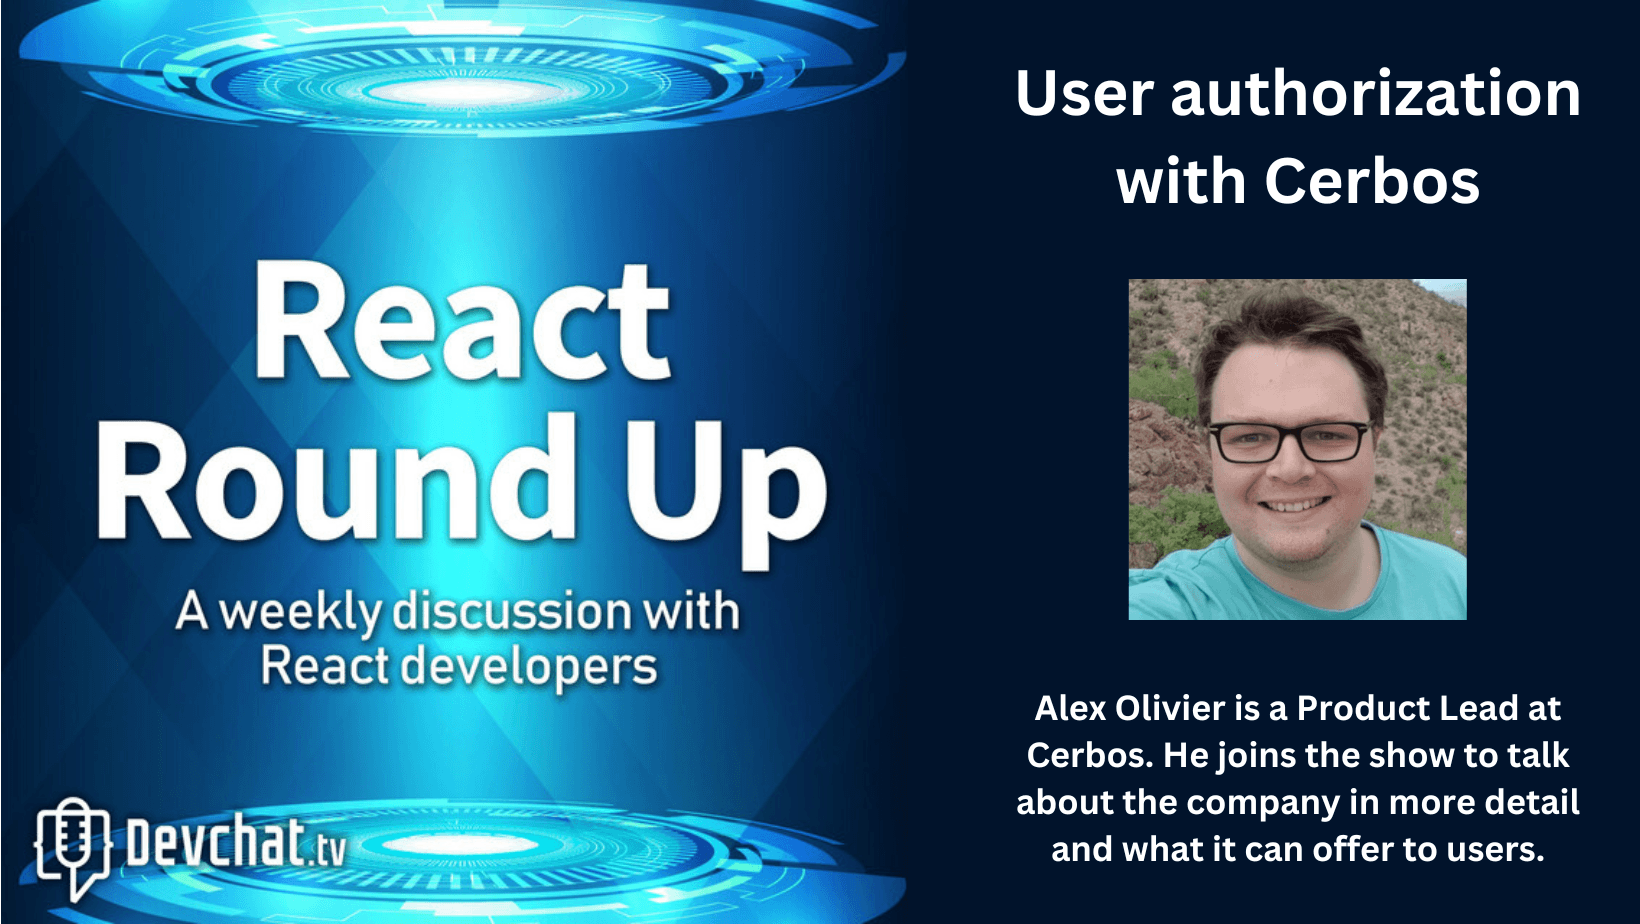 React Round Up podcast: User authorization with Cerbos